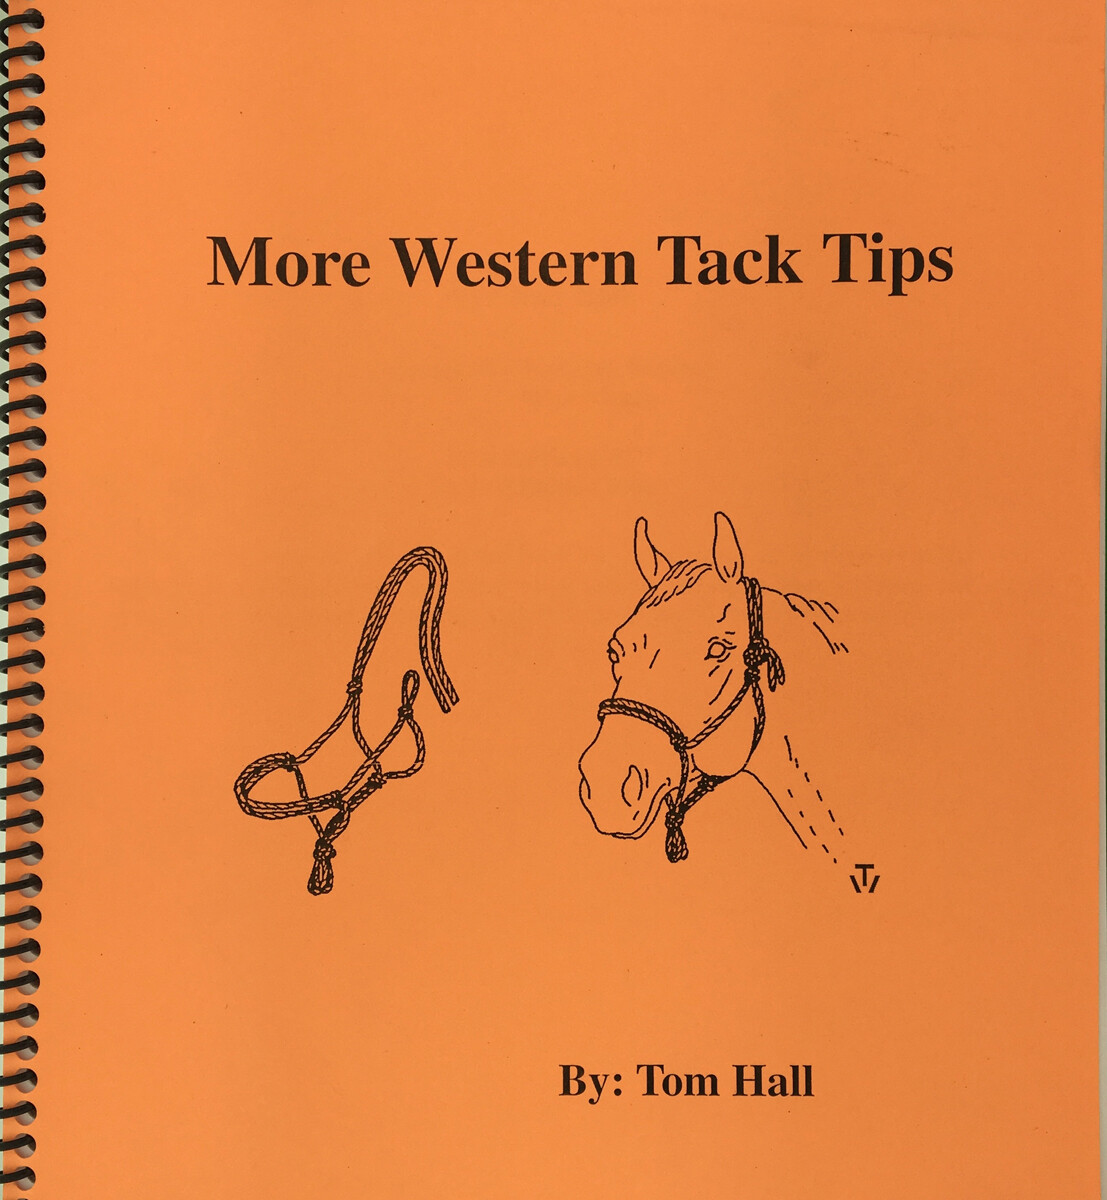 More Western Tack Tips